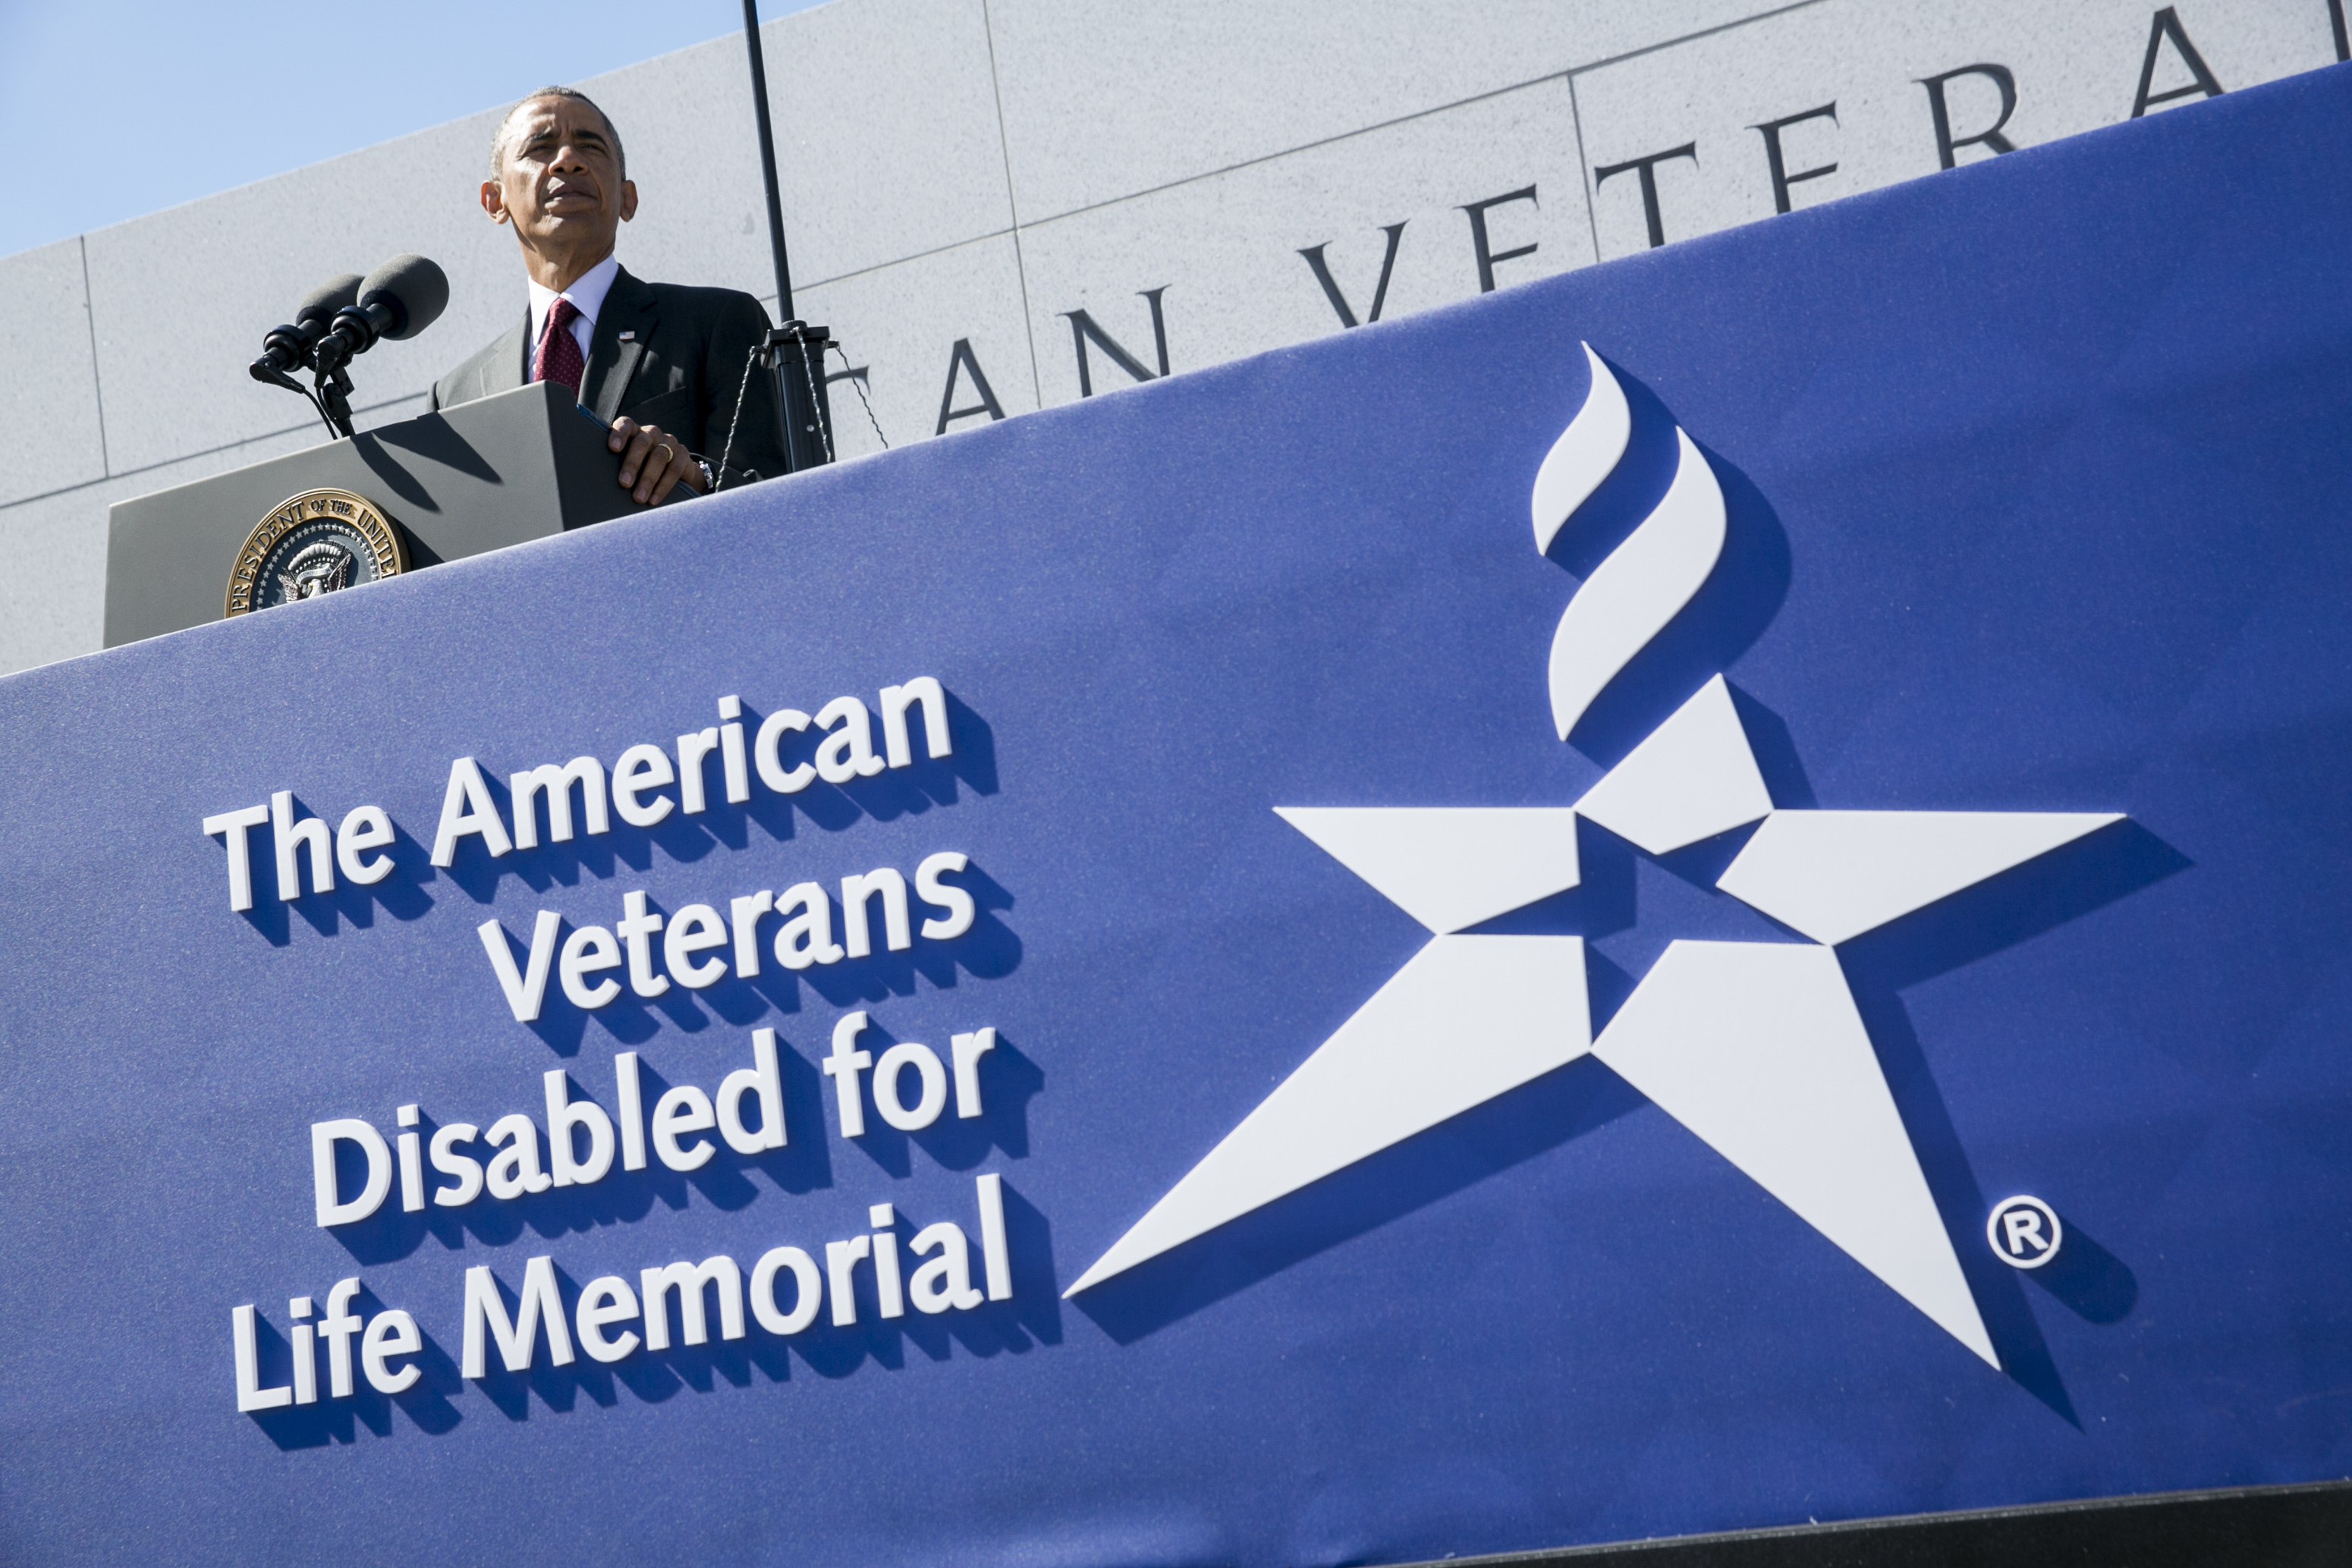 President Obama speaks Sunday at a new memorial in Washington dedicated to disabled veterans. (Pool / Getty Images)